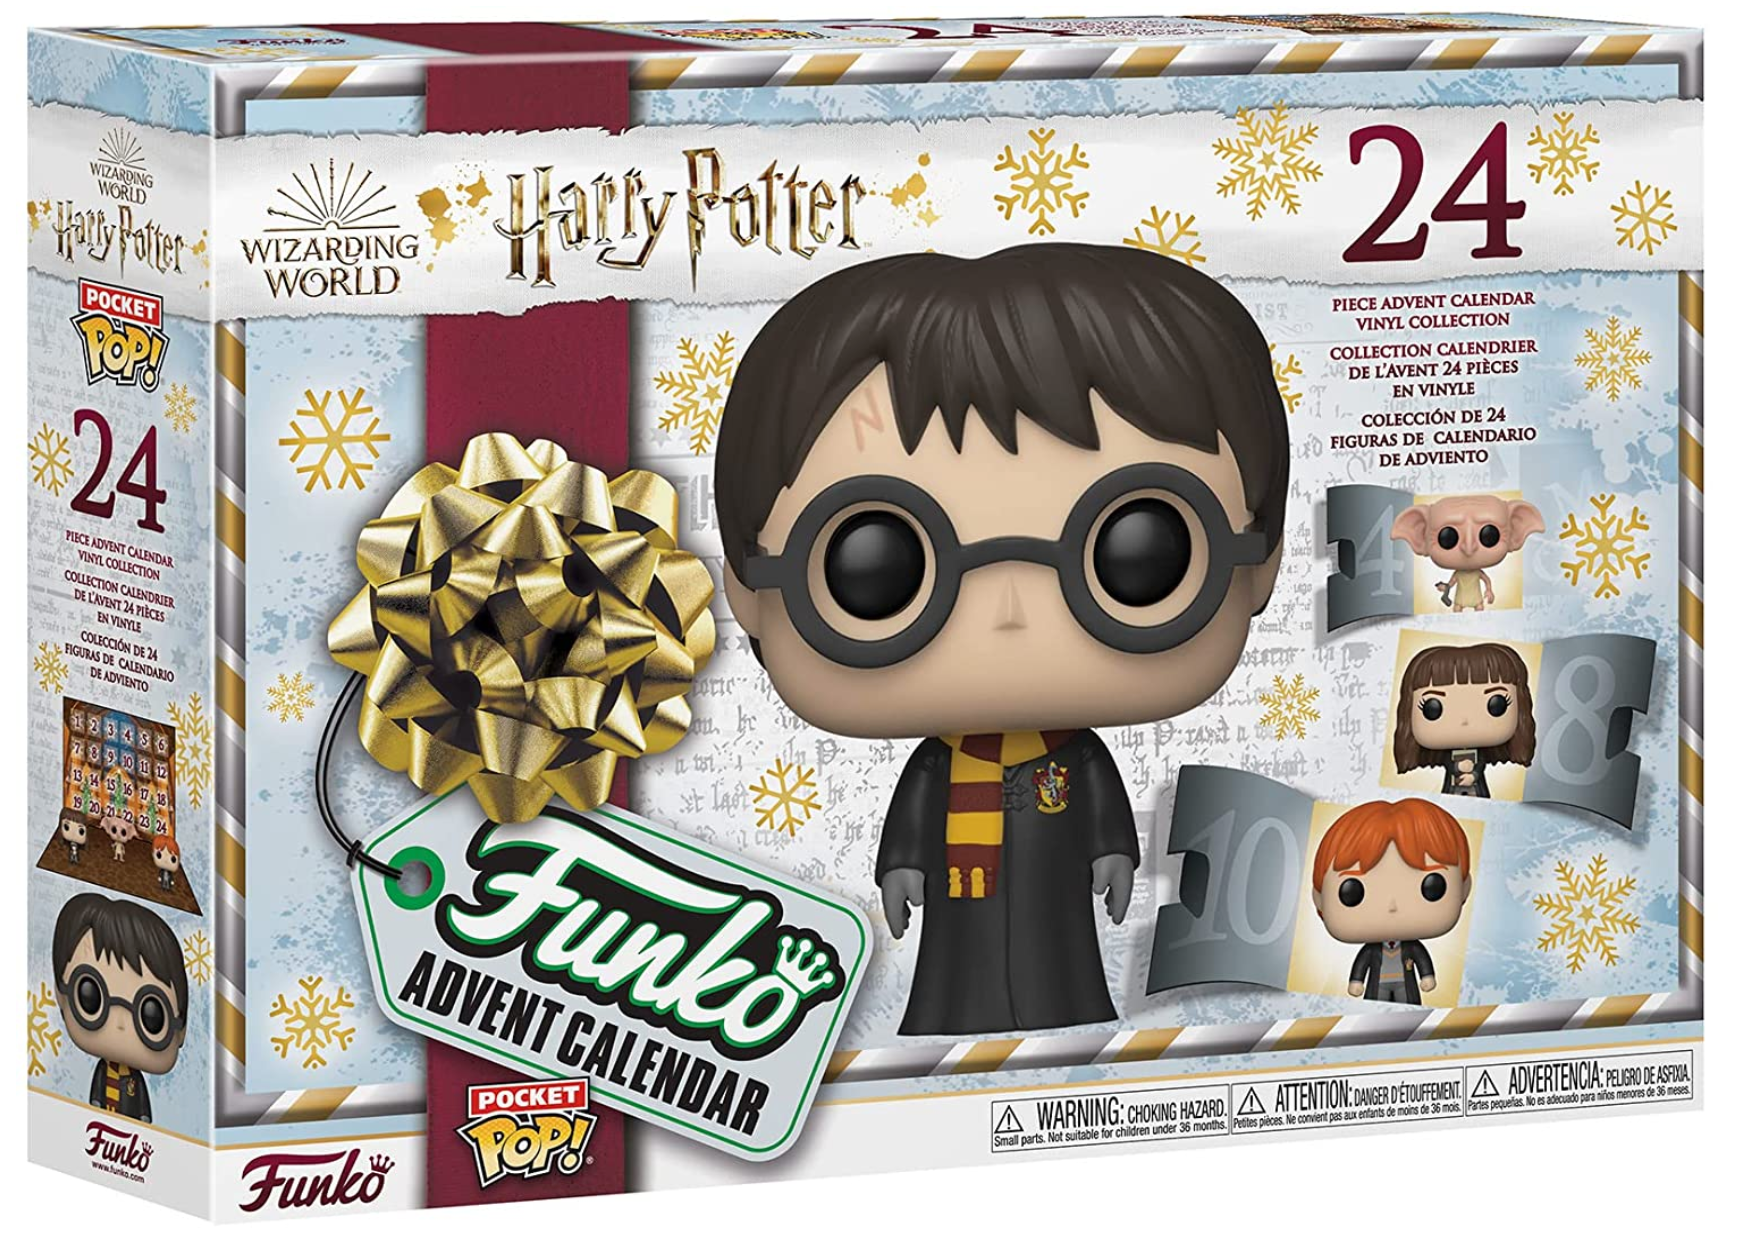 Toy Harry Potter - Collection | Posters, Gifts, Merchandise | Europosters